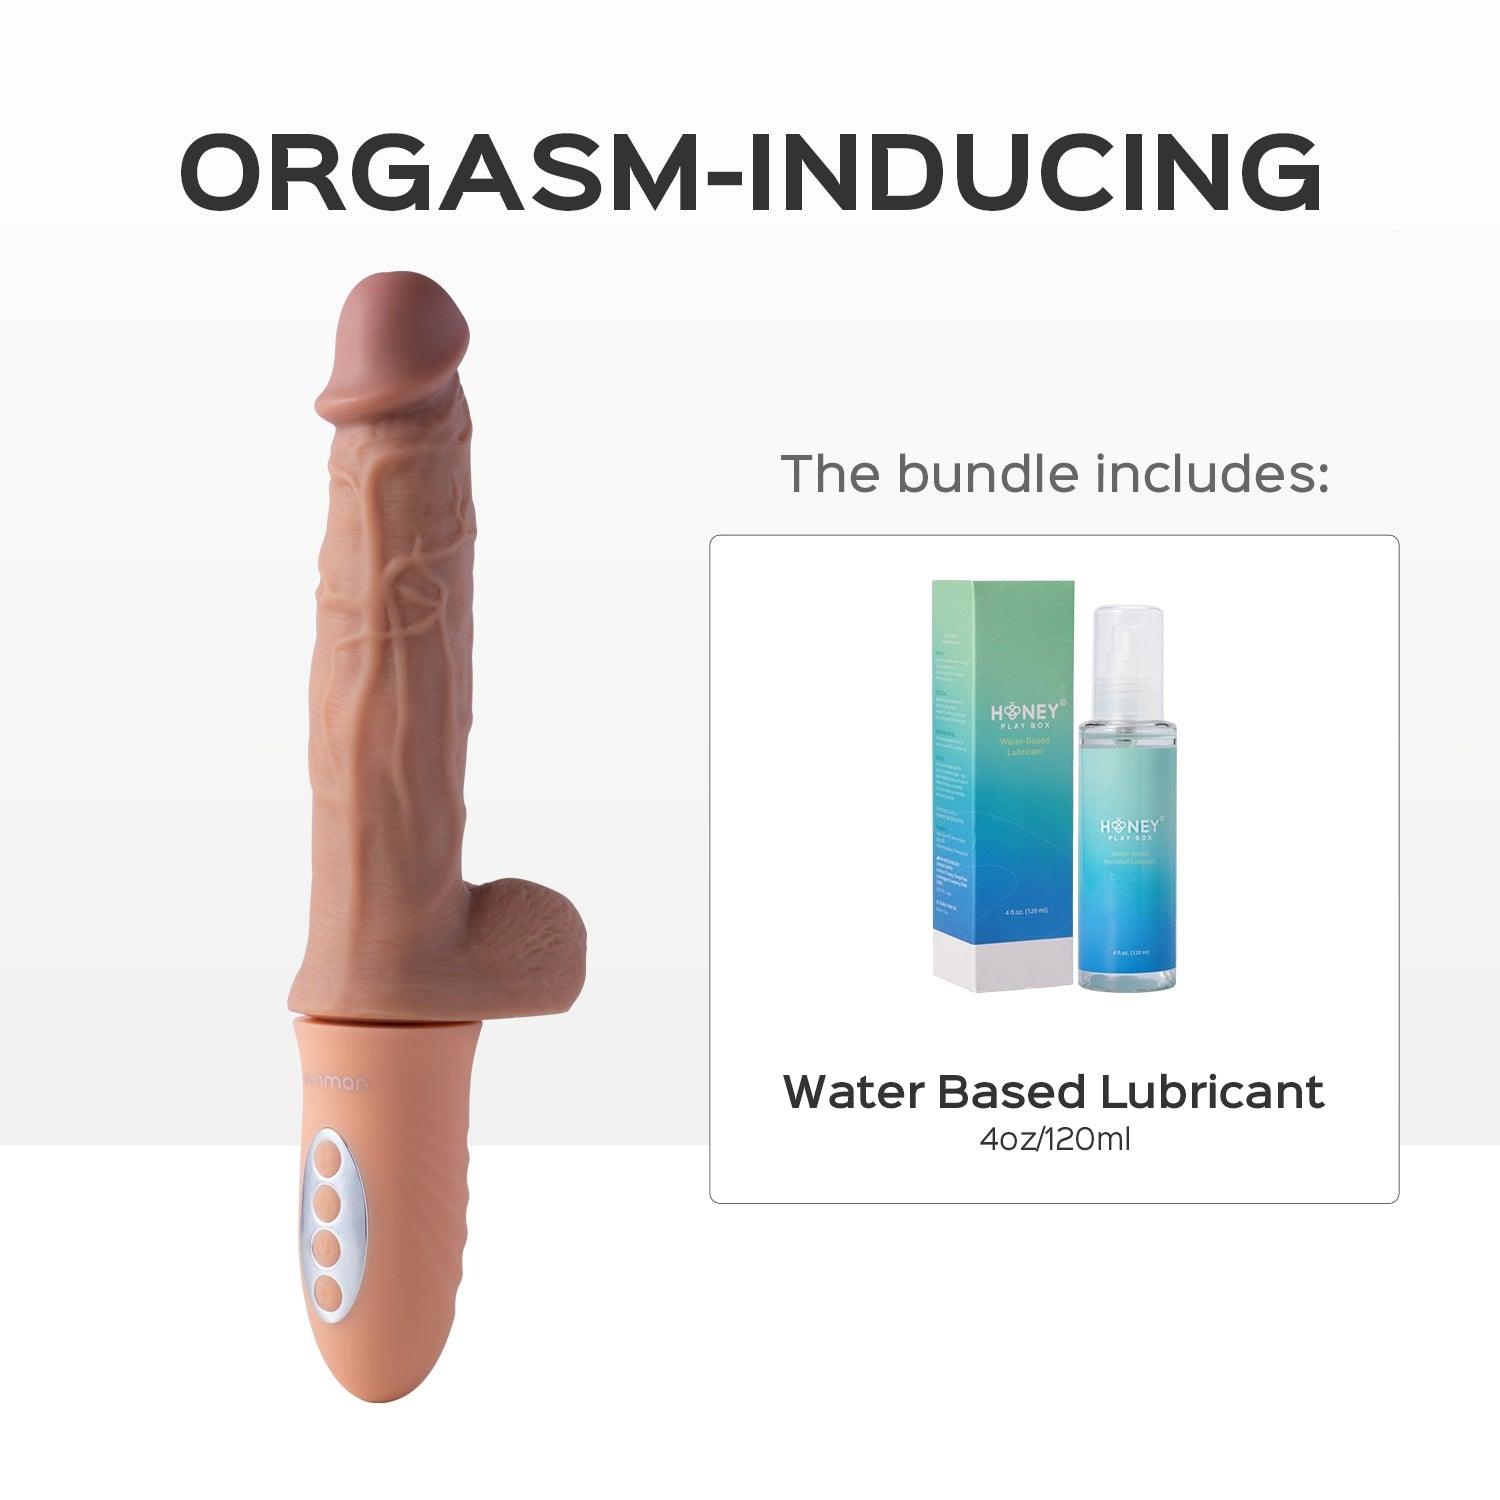 CANNON 10 Inch Dildo Handheld Sex Machine - Honey Play Box Official